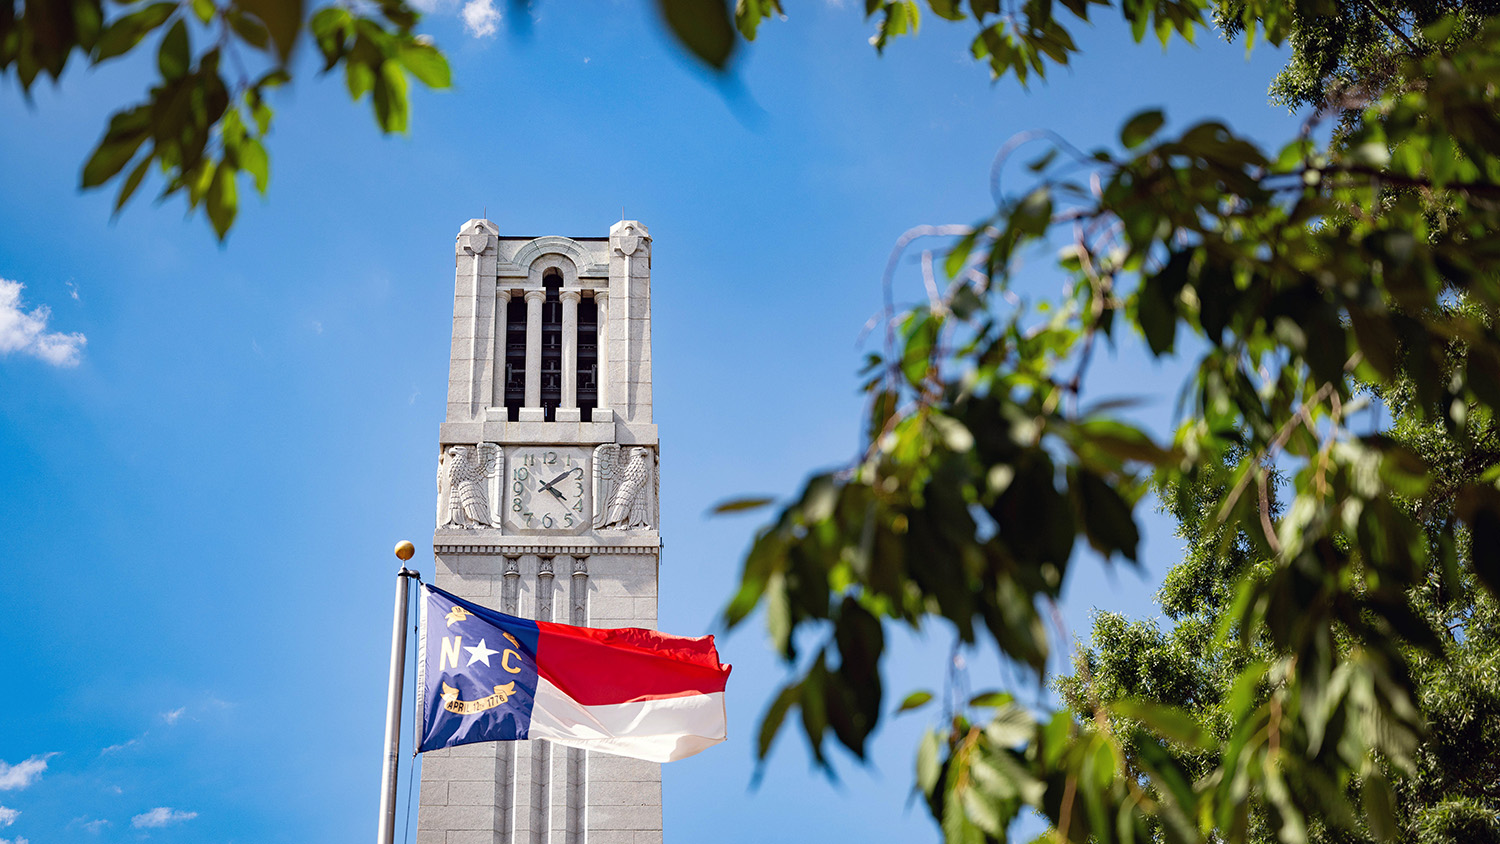 NC State Bell tower and North Carolina flag.